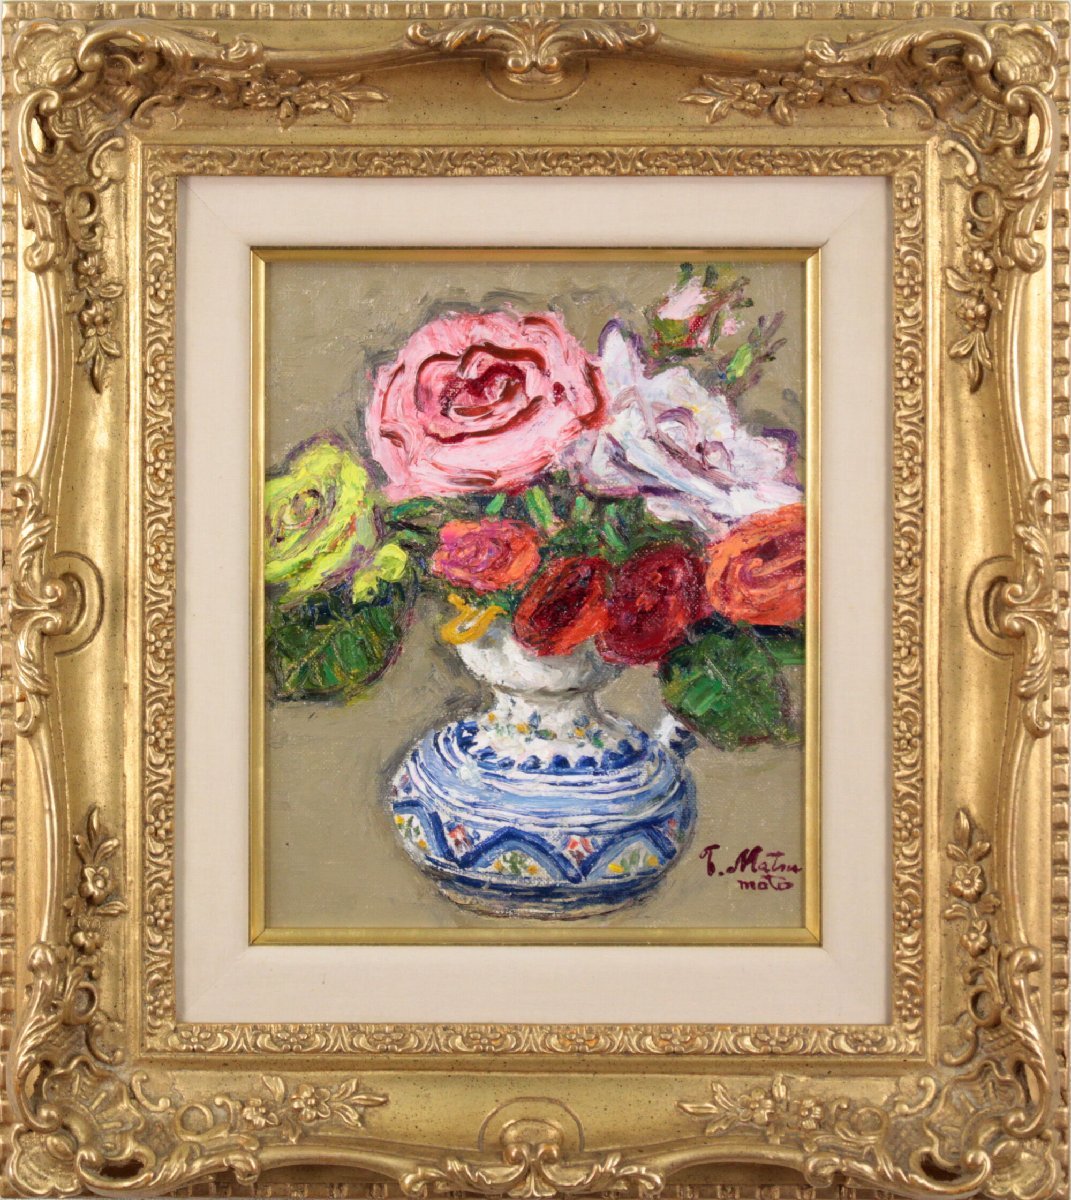 Tomitaro Matsumoto Roses in a Spanish Vase Oil Painting [Authentic Guaranteed] Painting - Hokkaido Gallery, Painting, Oil painting, Still life